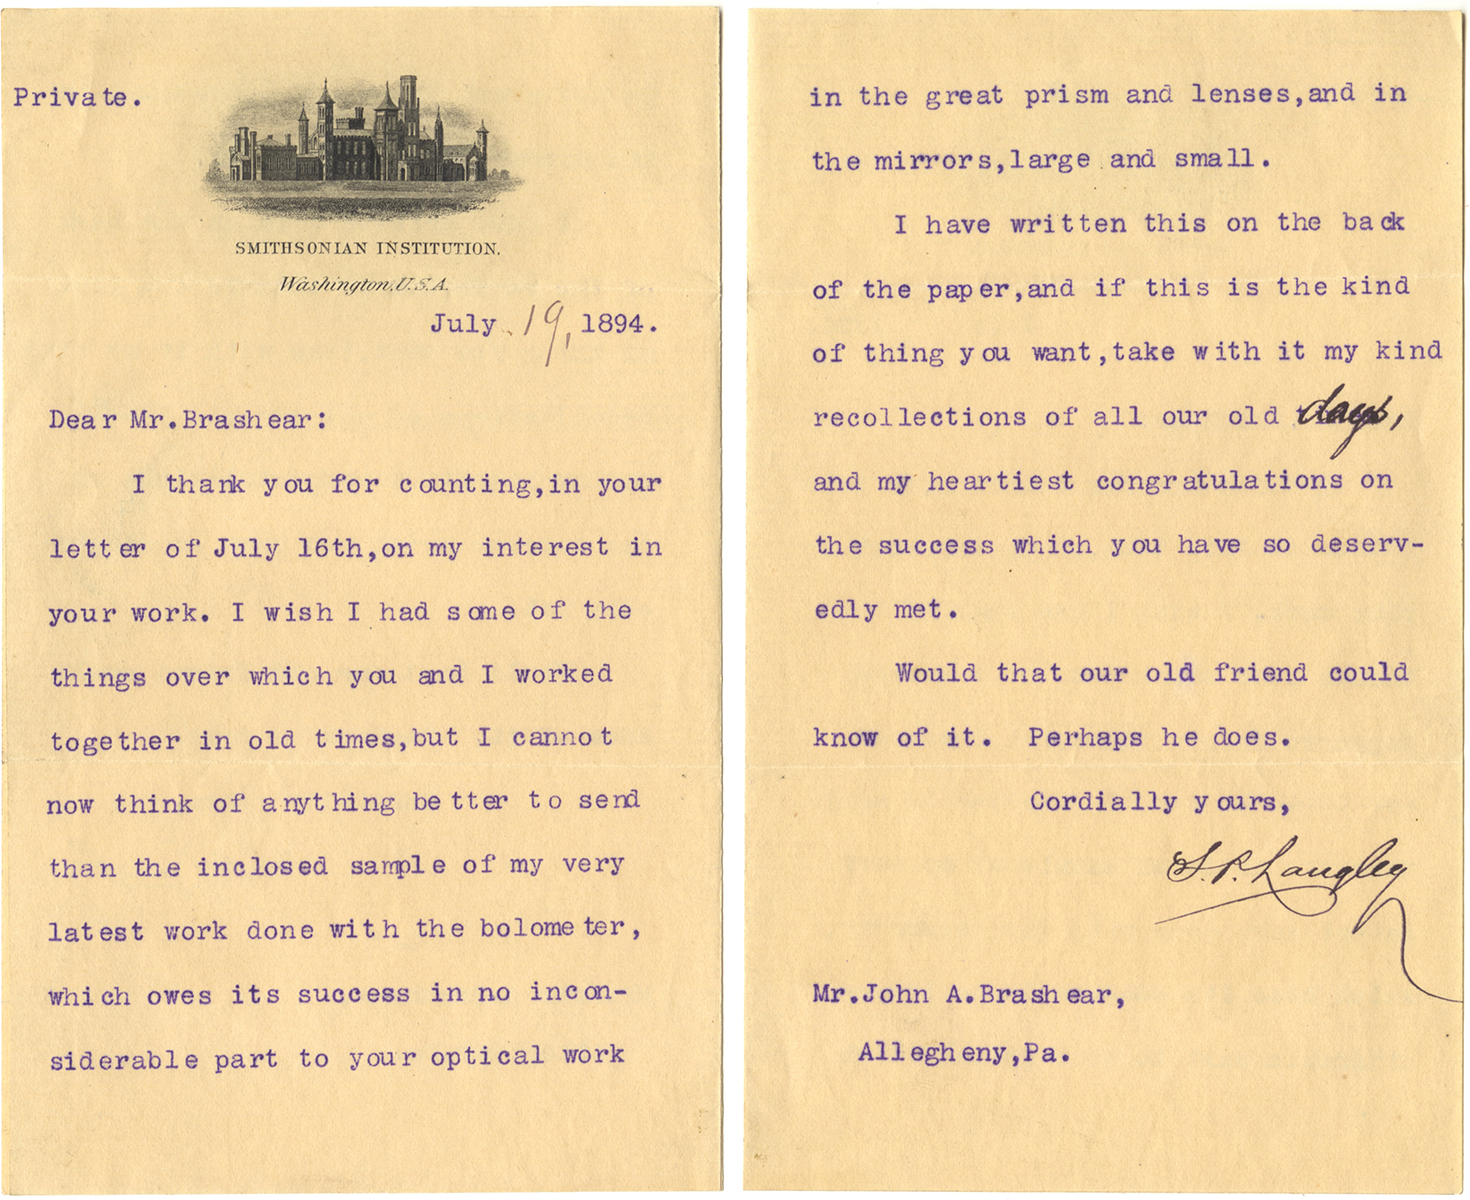 Letter from Samuel P. Langley on Smithsonian Institution letterhead, dated July 19, 1894, Heinz History Center.